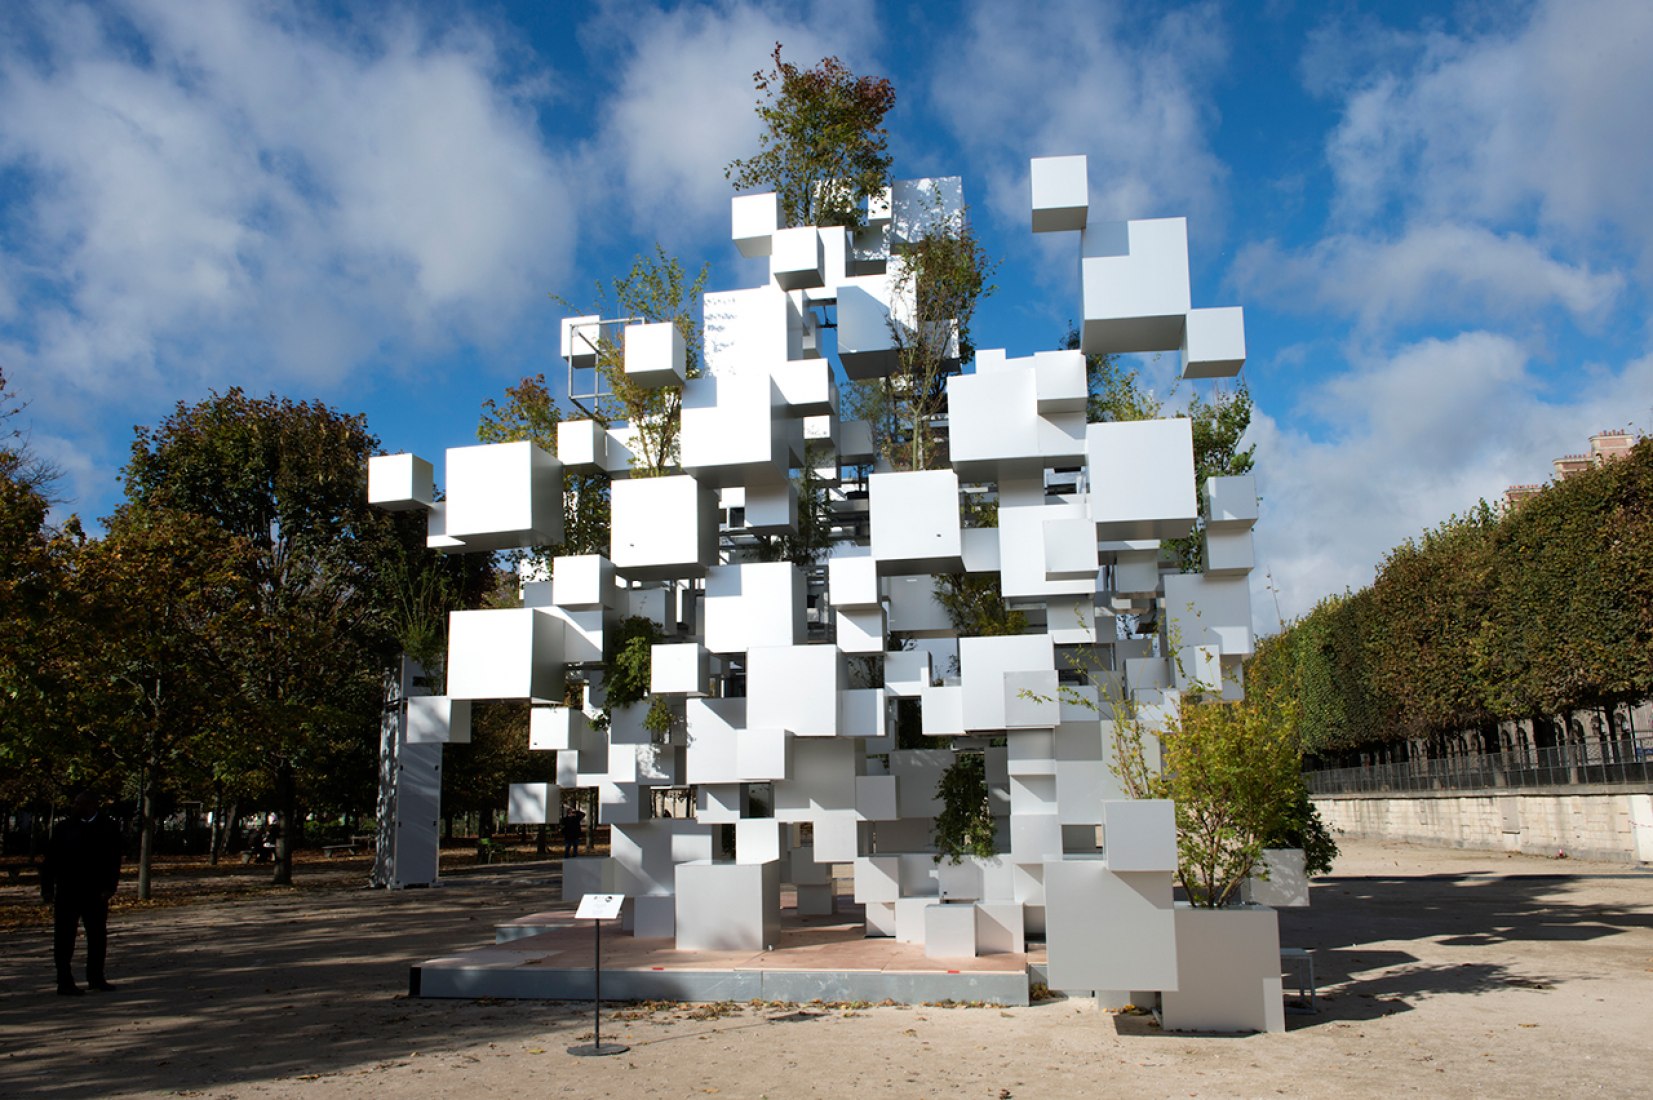 Sou Fujimoto, Small Nomad House project «Many Small Cubes», 2014. Steel, anodized aluminum, trees. 800 x 900 x 1000 cm. By Galerie Philippe Gravier, Paris , 2014. Photograph © Marc Domage